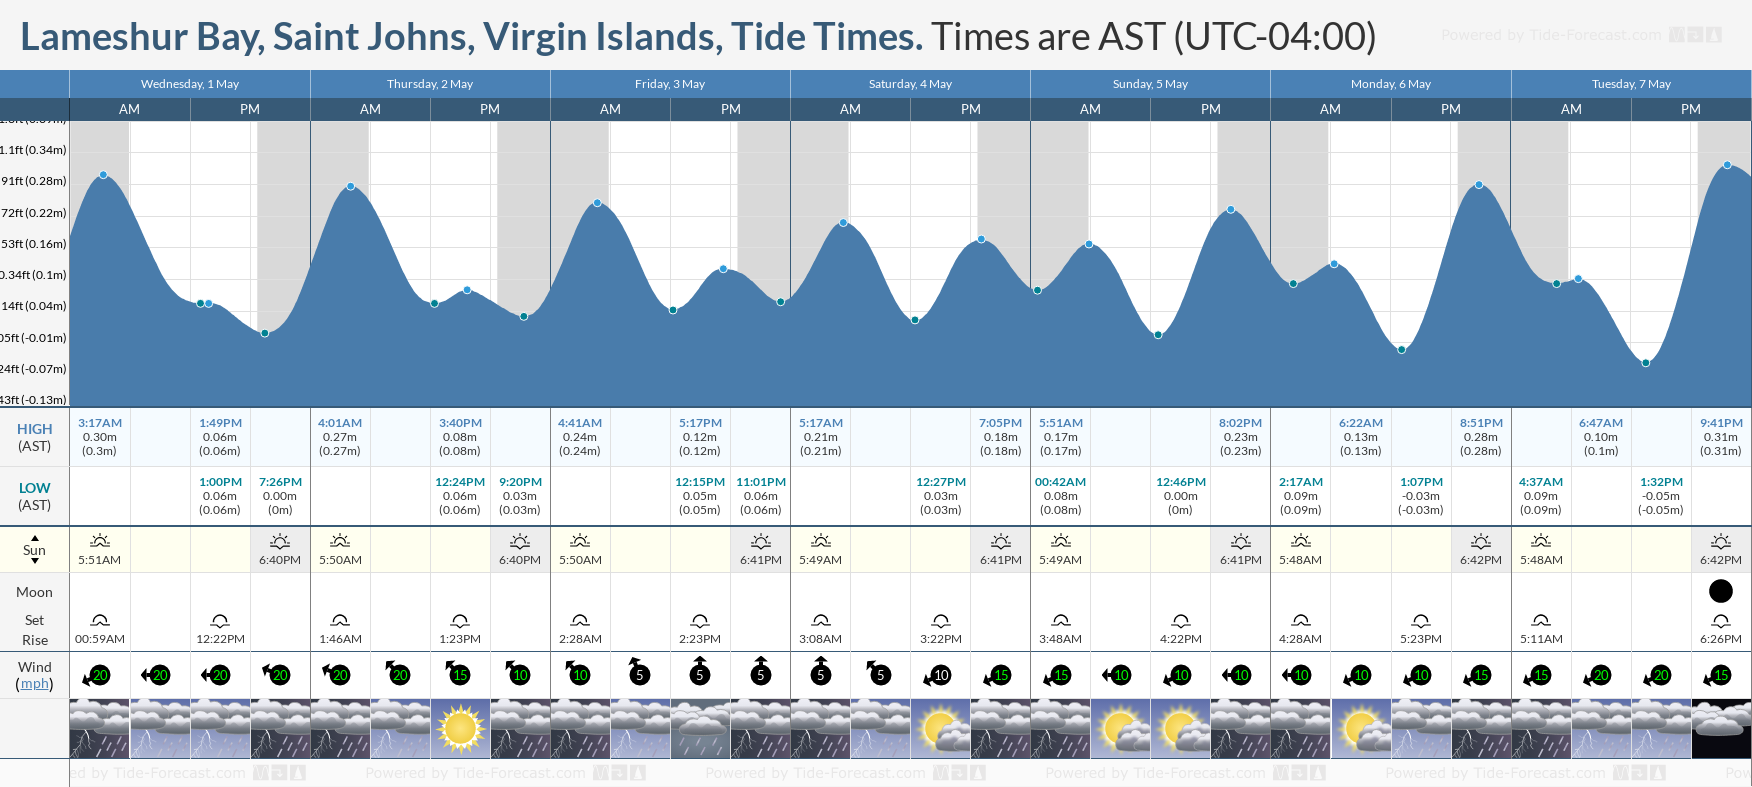 Lameshur Bay, Saint Johns, Virgin Islands Tide Chart including high and low tide tide times for the next 7 days